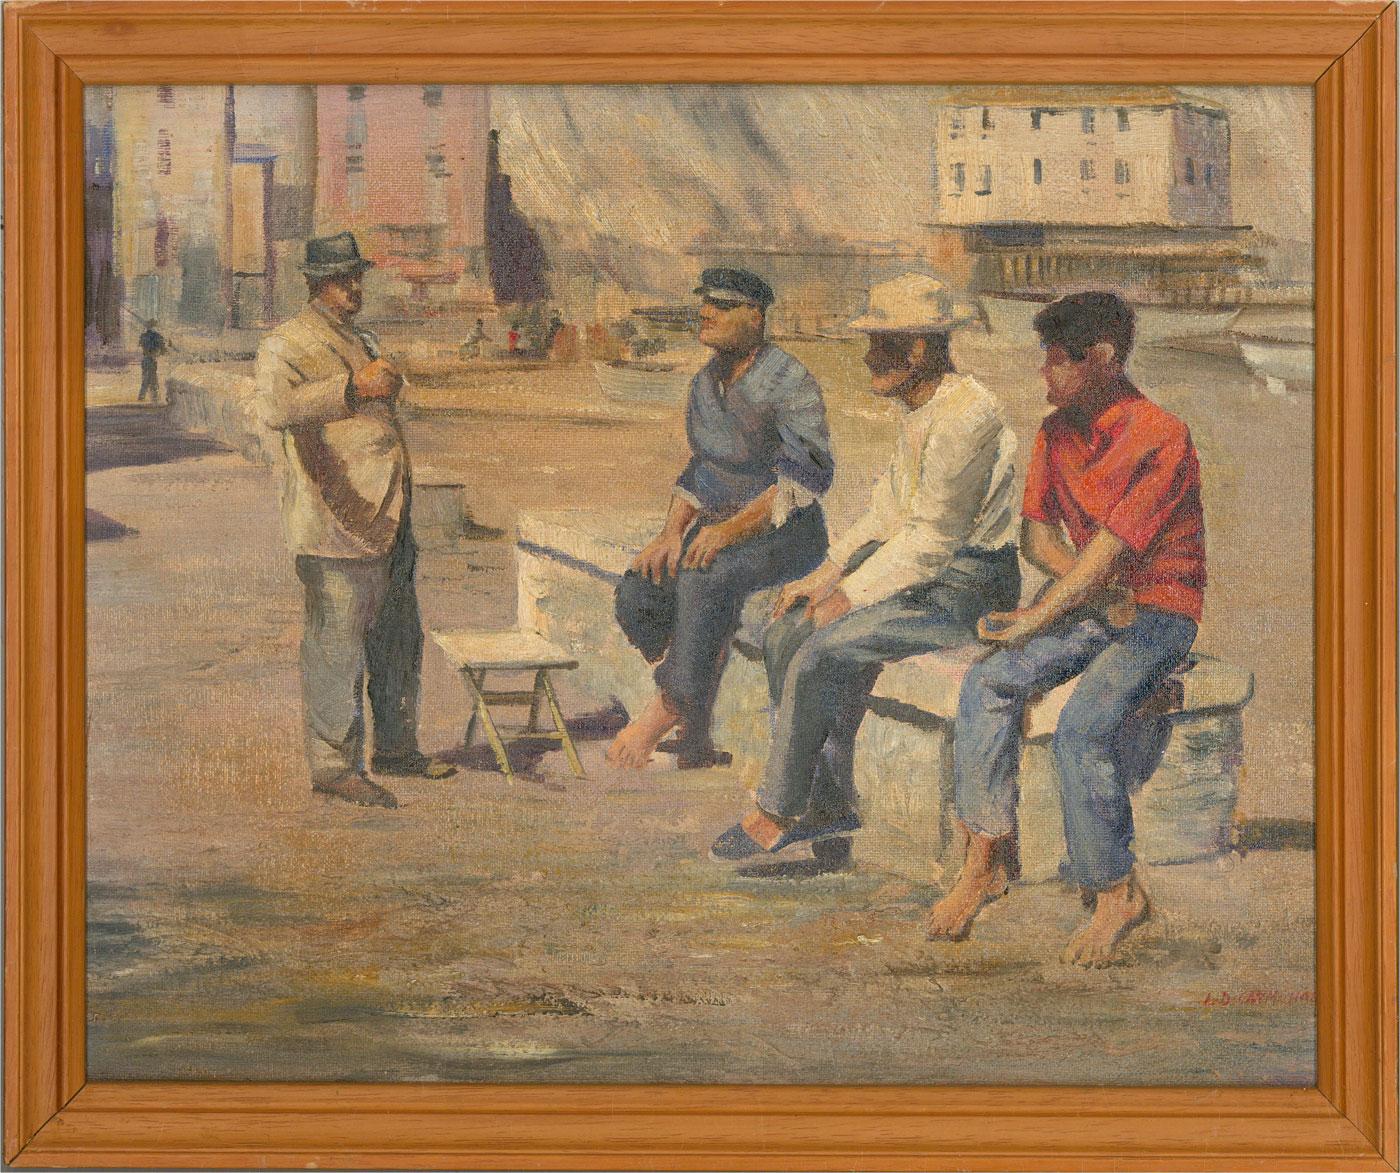 A delightful oil study of four men loitering by the harbourside. They appear to be engaged in conversation whilst one is off to the side smoking a cigarette. In the background we can see a continental town with various figures tending to their